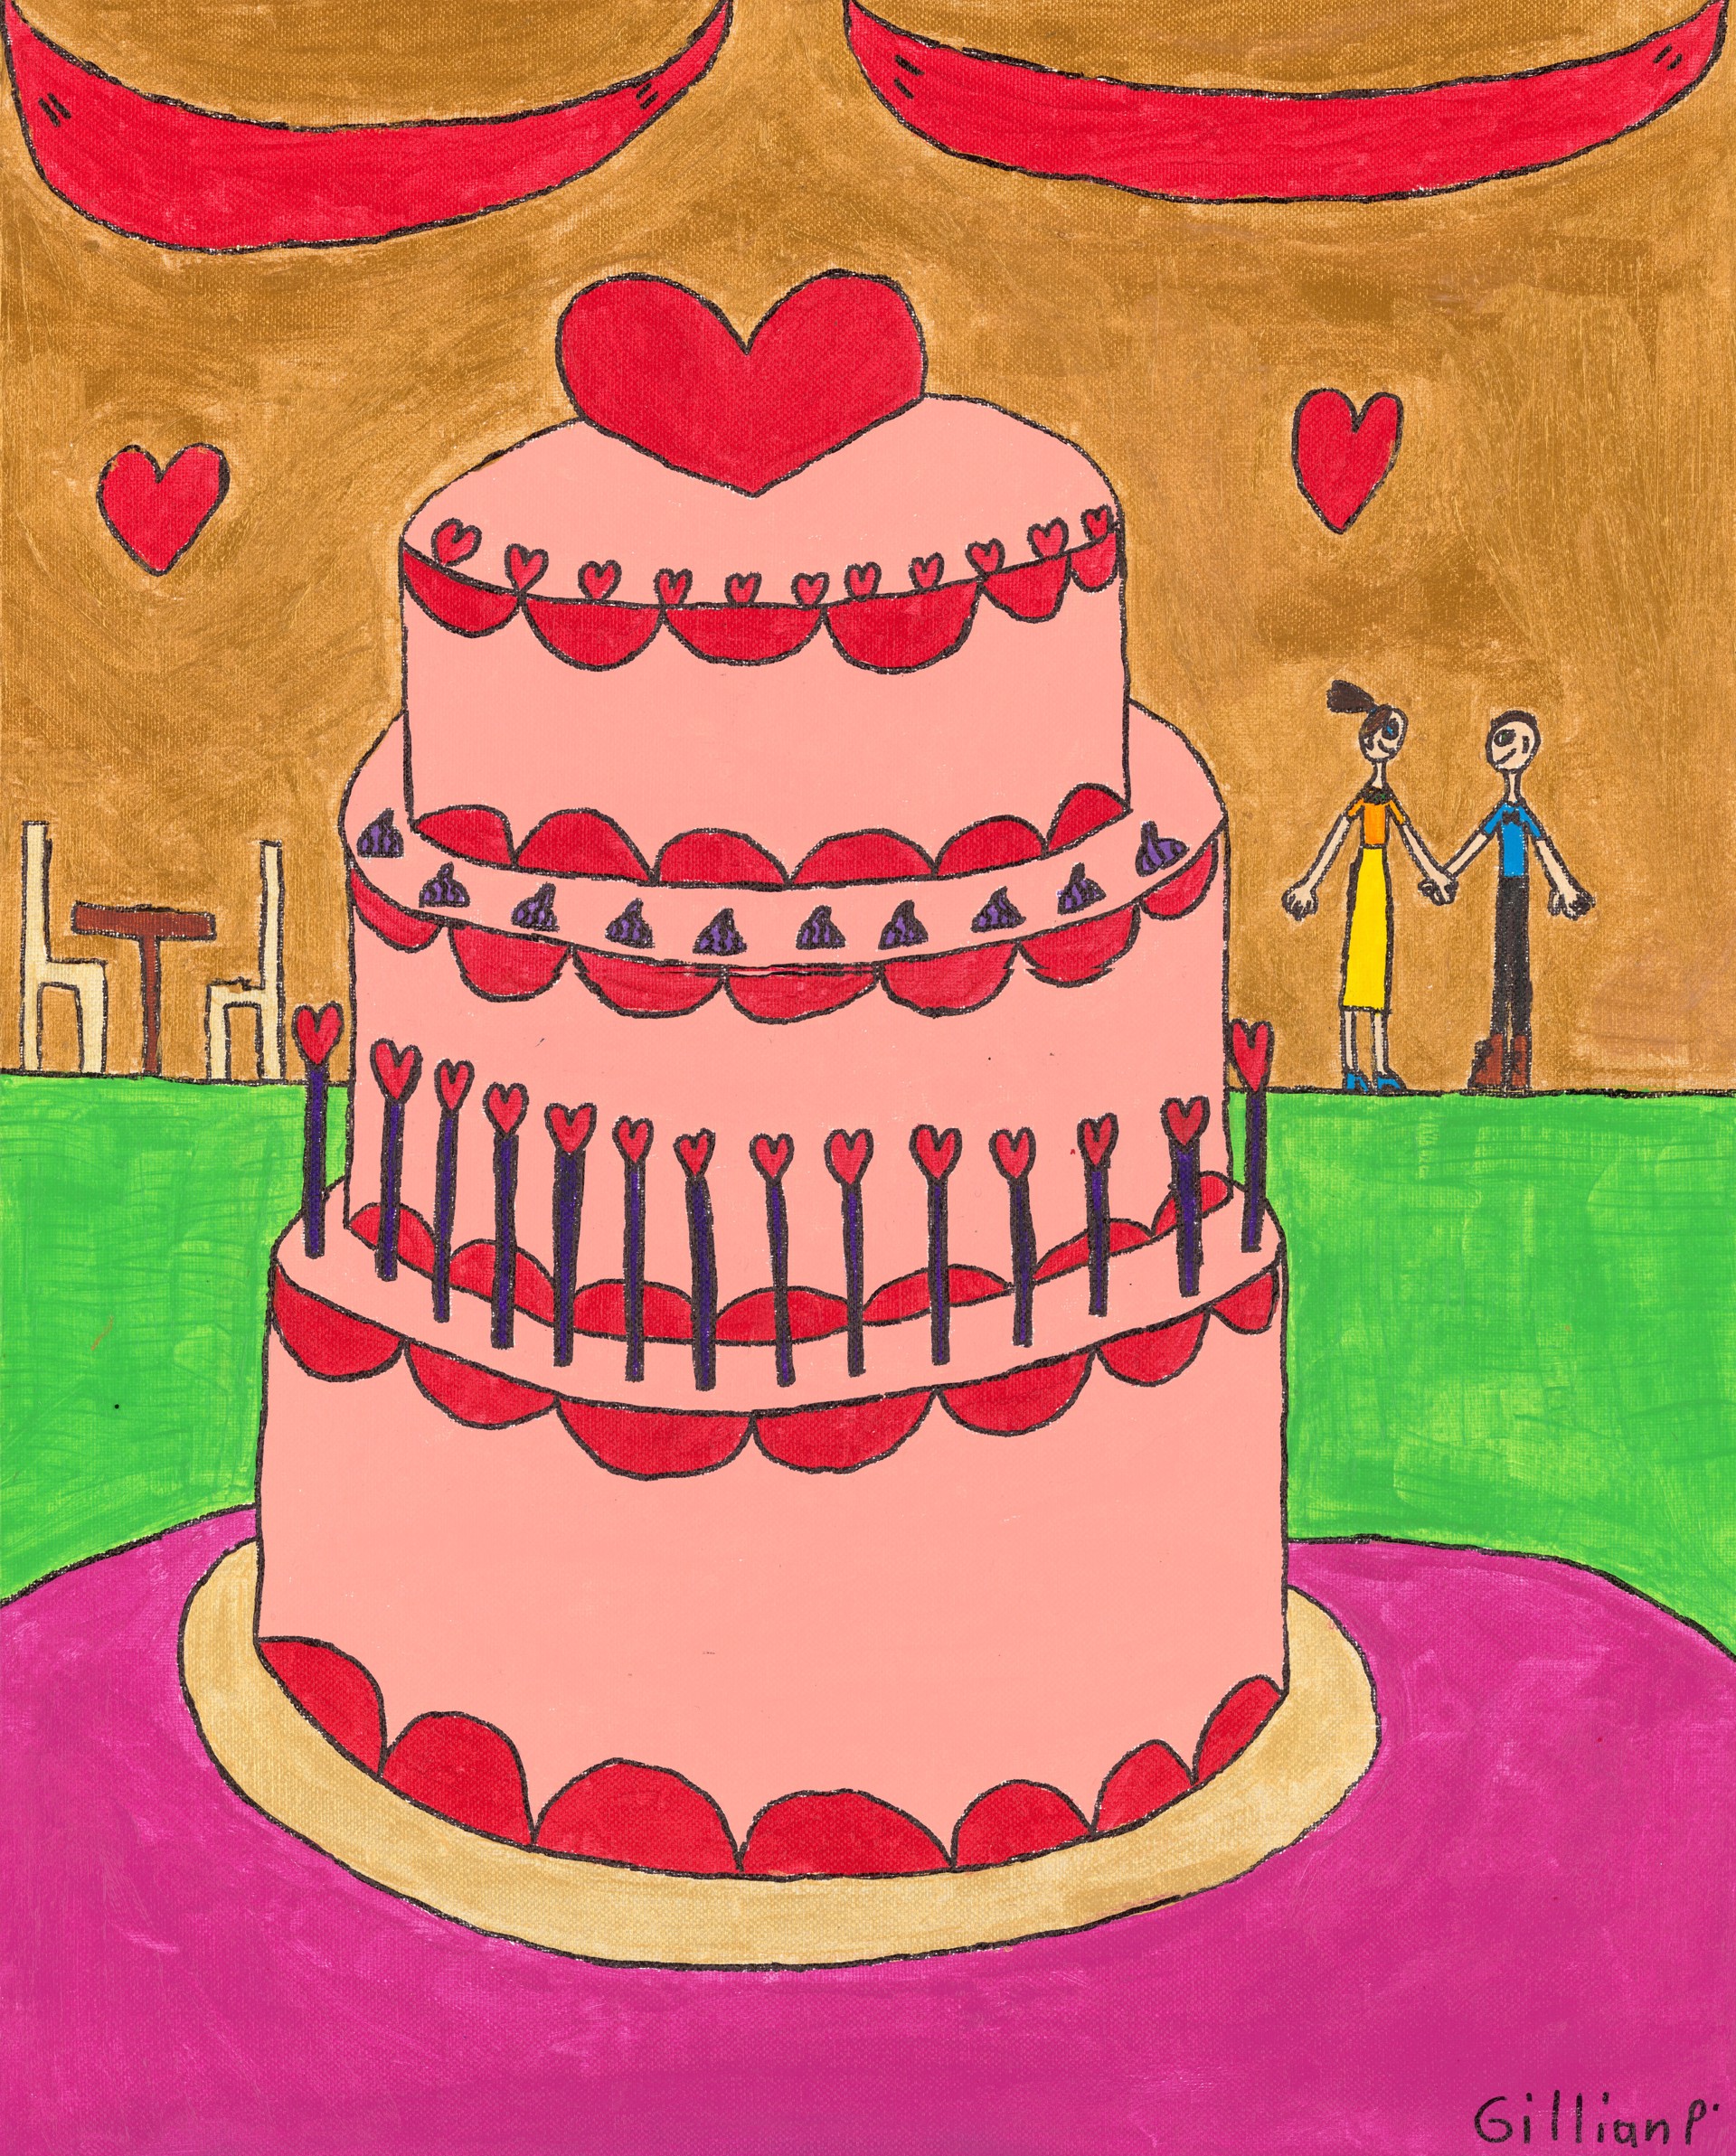 The Cake of Love by Gillian Patterson